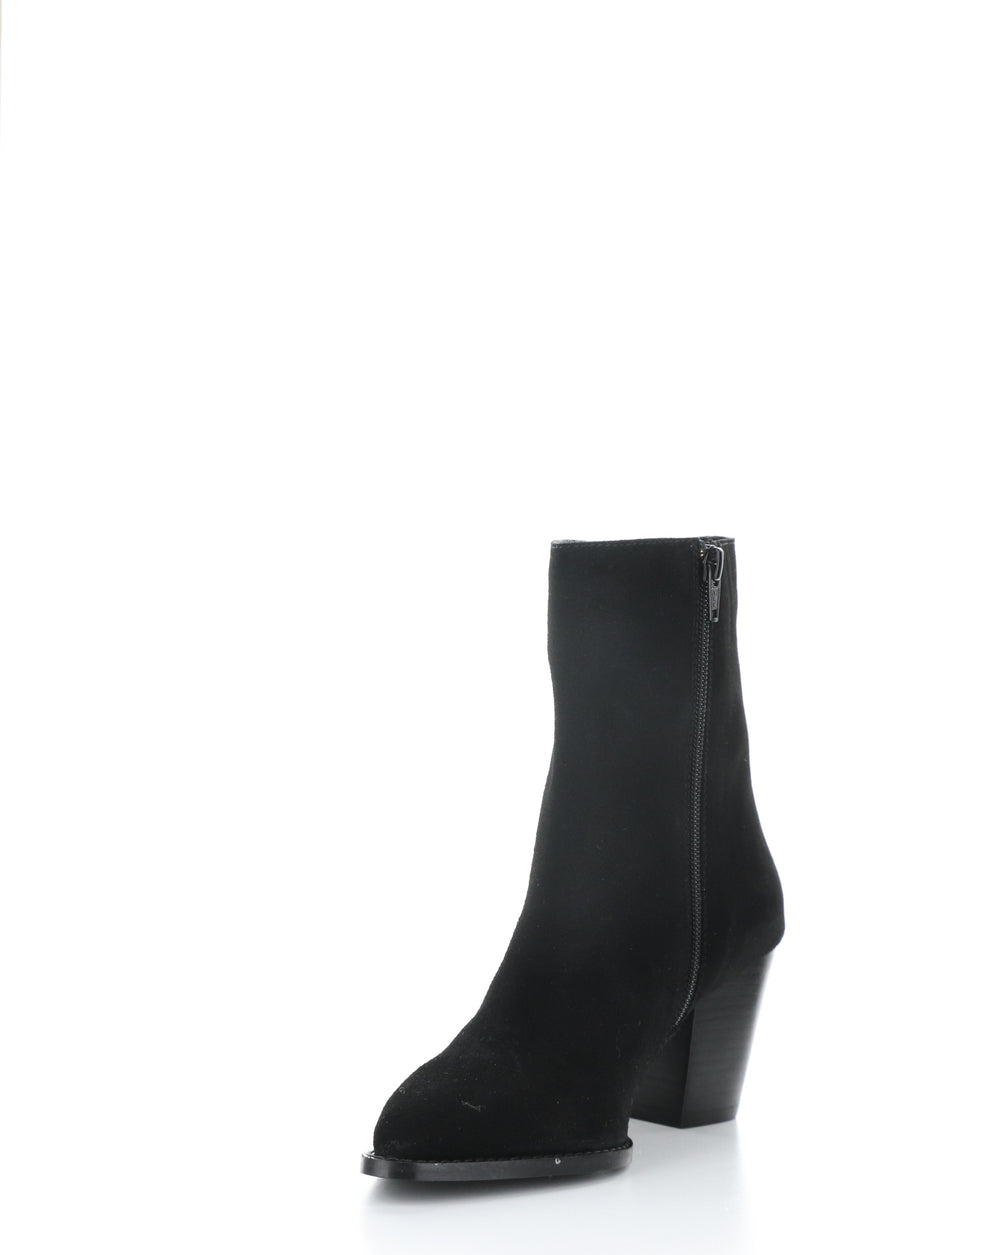 TALLON BLACK Pointed Toe Boots